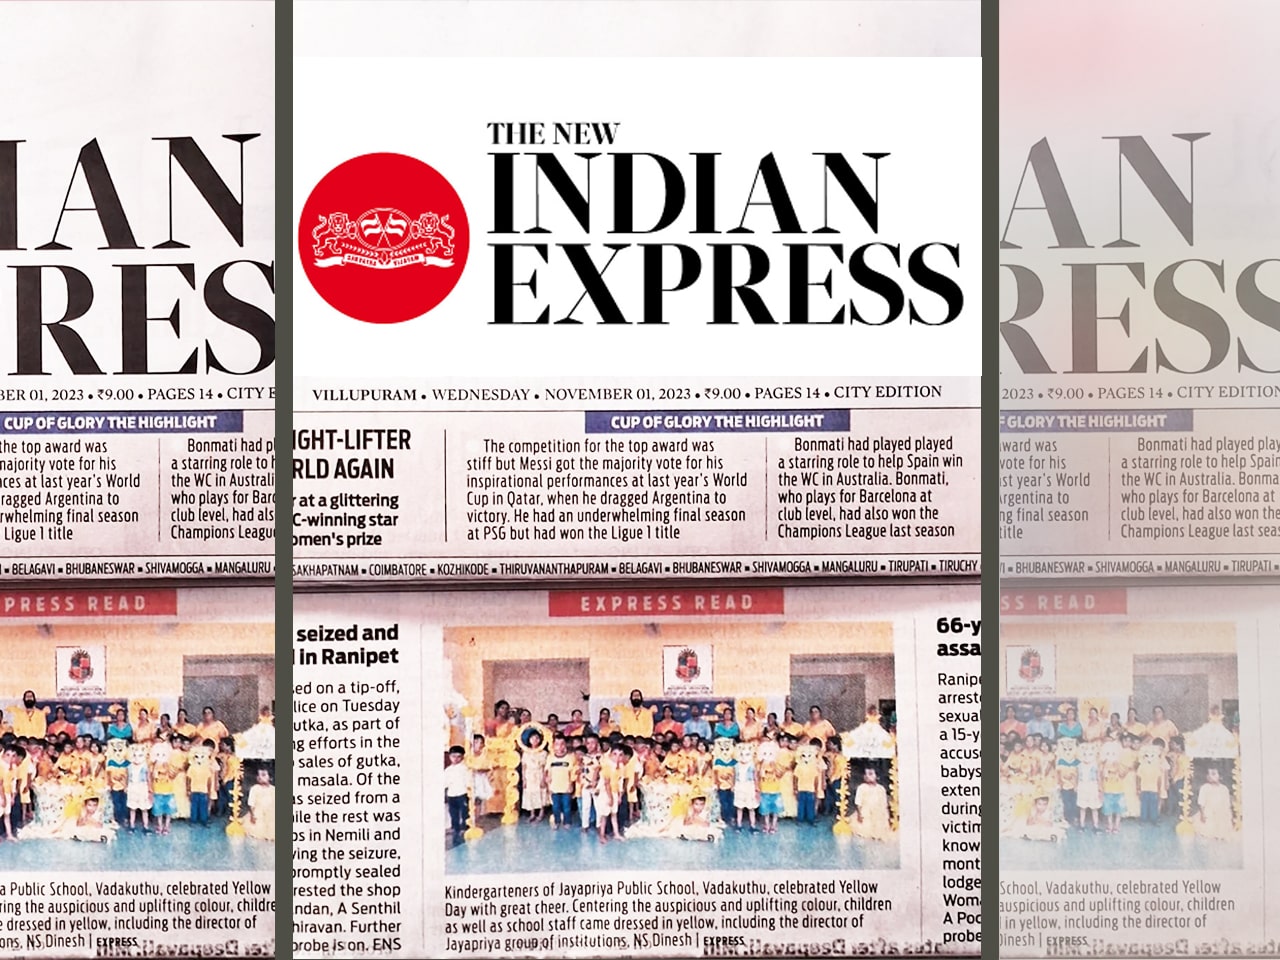 The New Indian Express - Kids at JPV celebrated Yellow Day with auspiciousness.